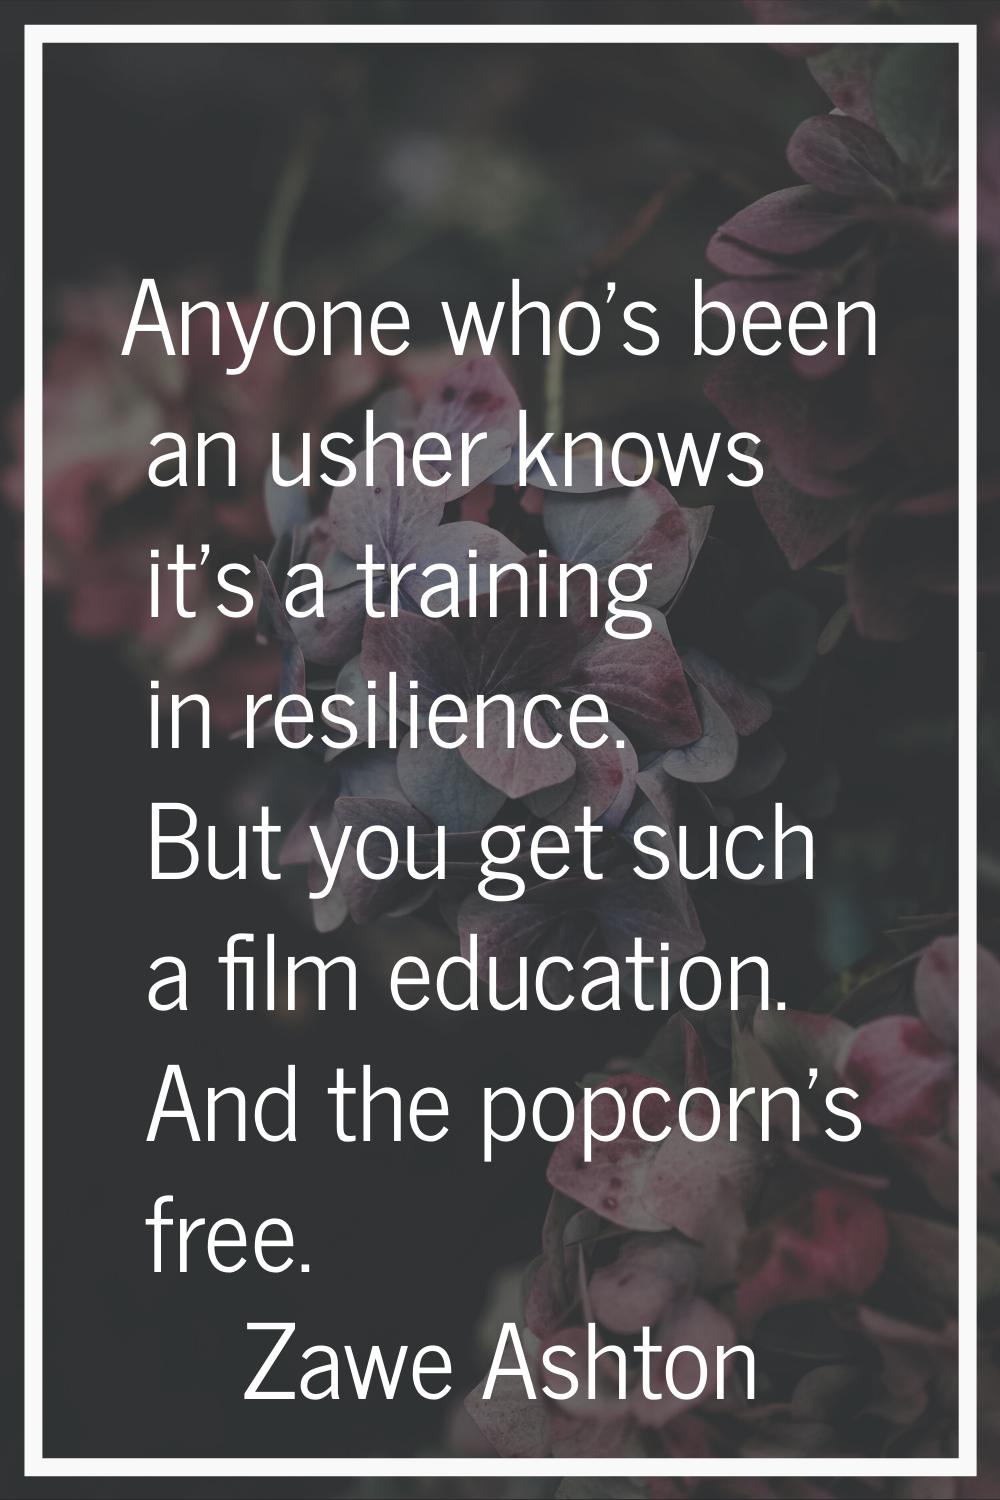 Anyone who's been an usher knows it's a training in resilience. But you get such a film education. 